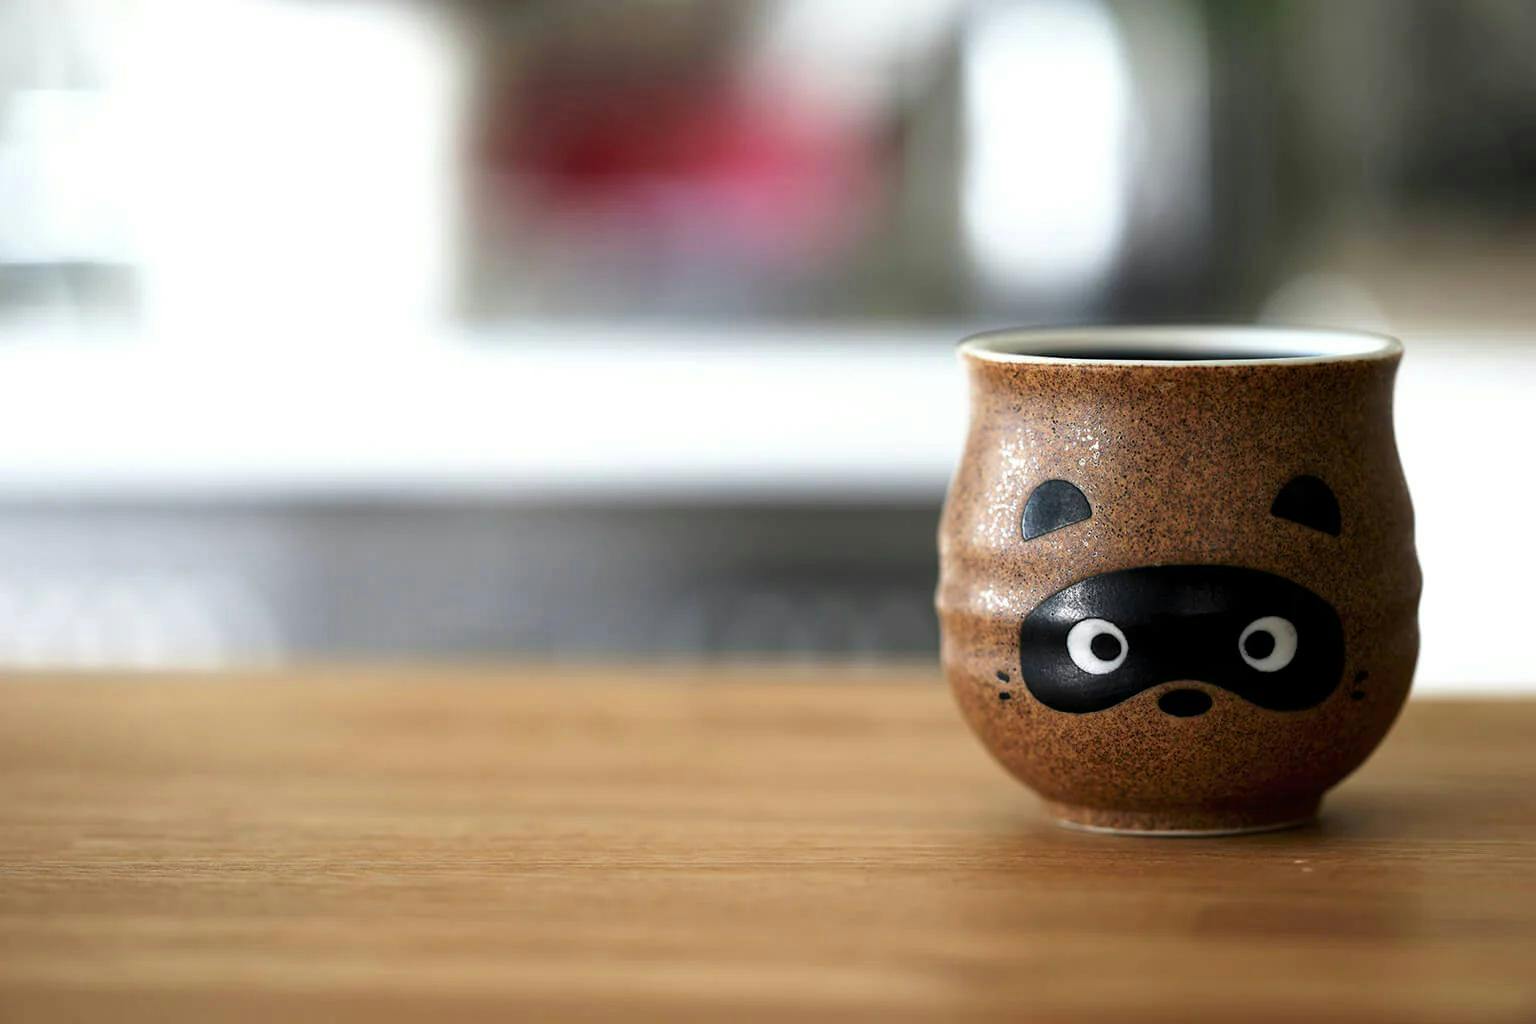 Tanuki are believed to bring good fortune. Depictions of the creatures can be found all over Japan, like this cup!